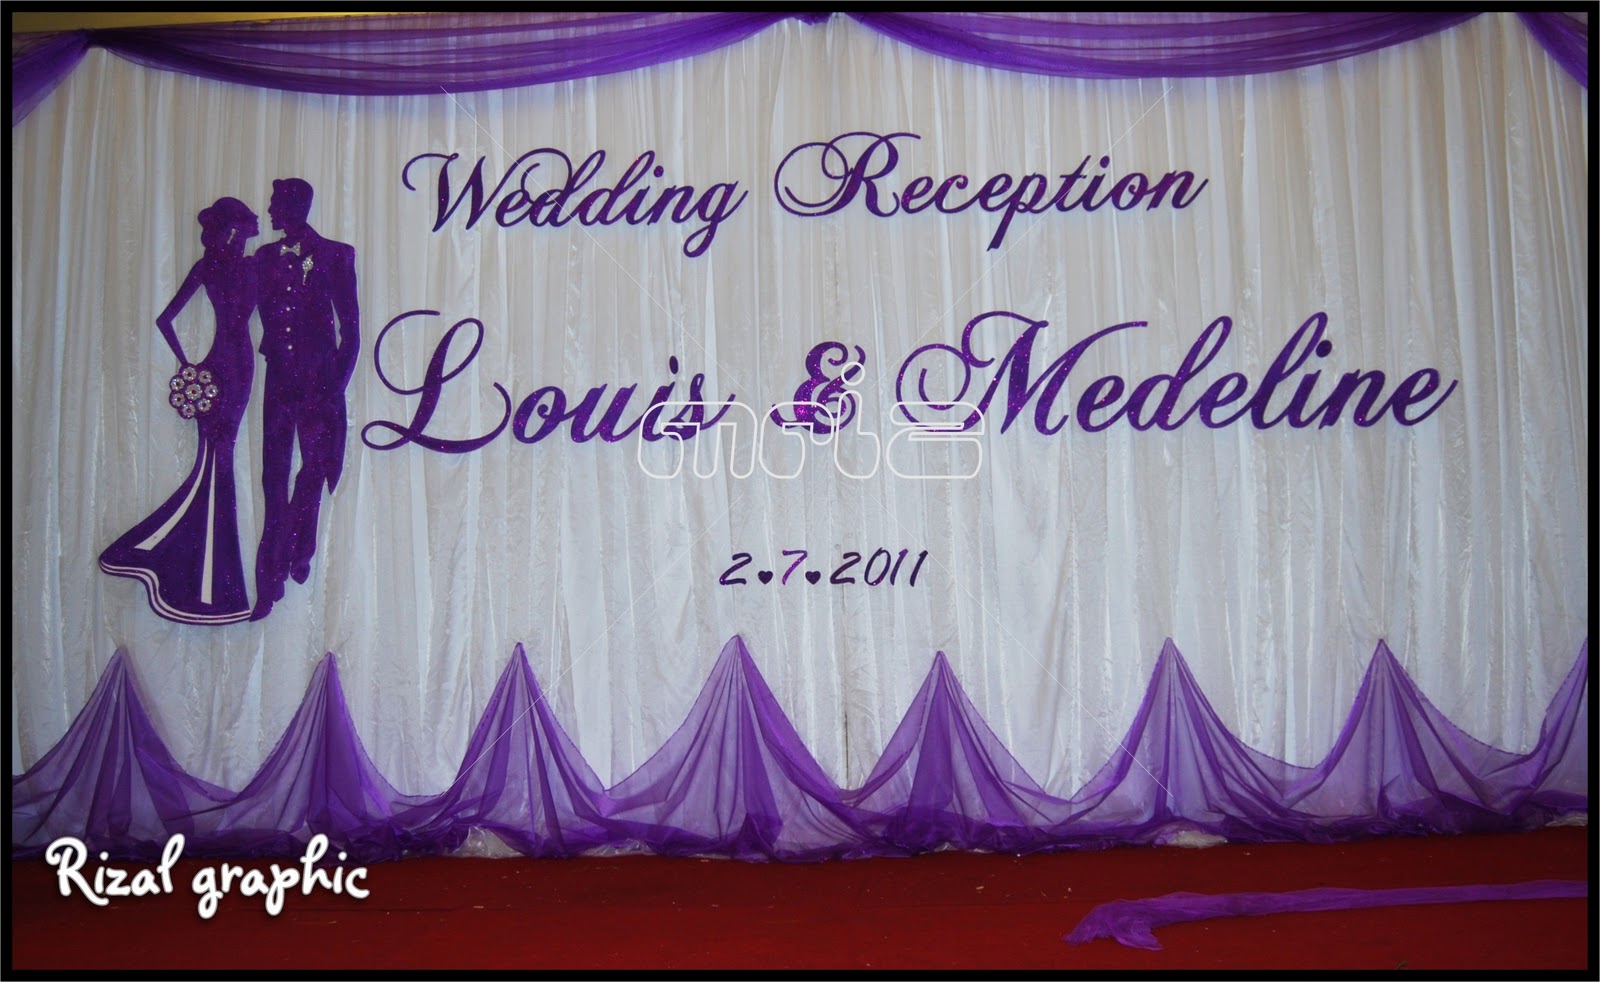 Wedding backdrop for Louis & Medeline. Posted by Riz@l at 5:41 PM